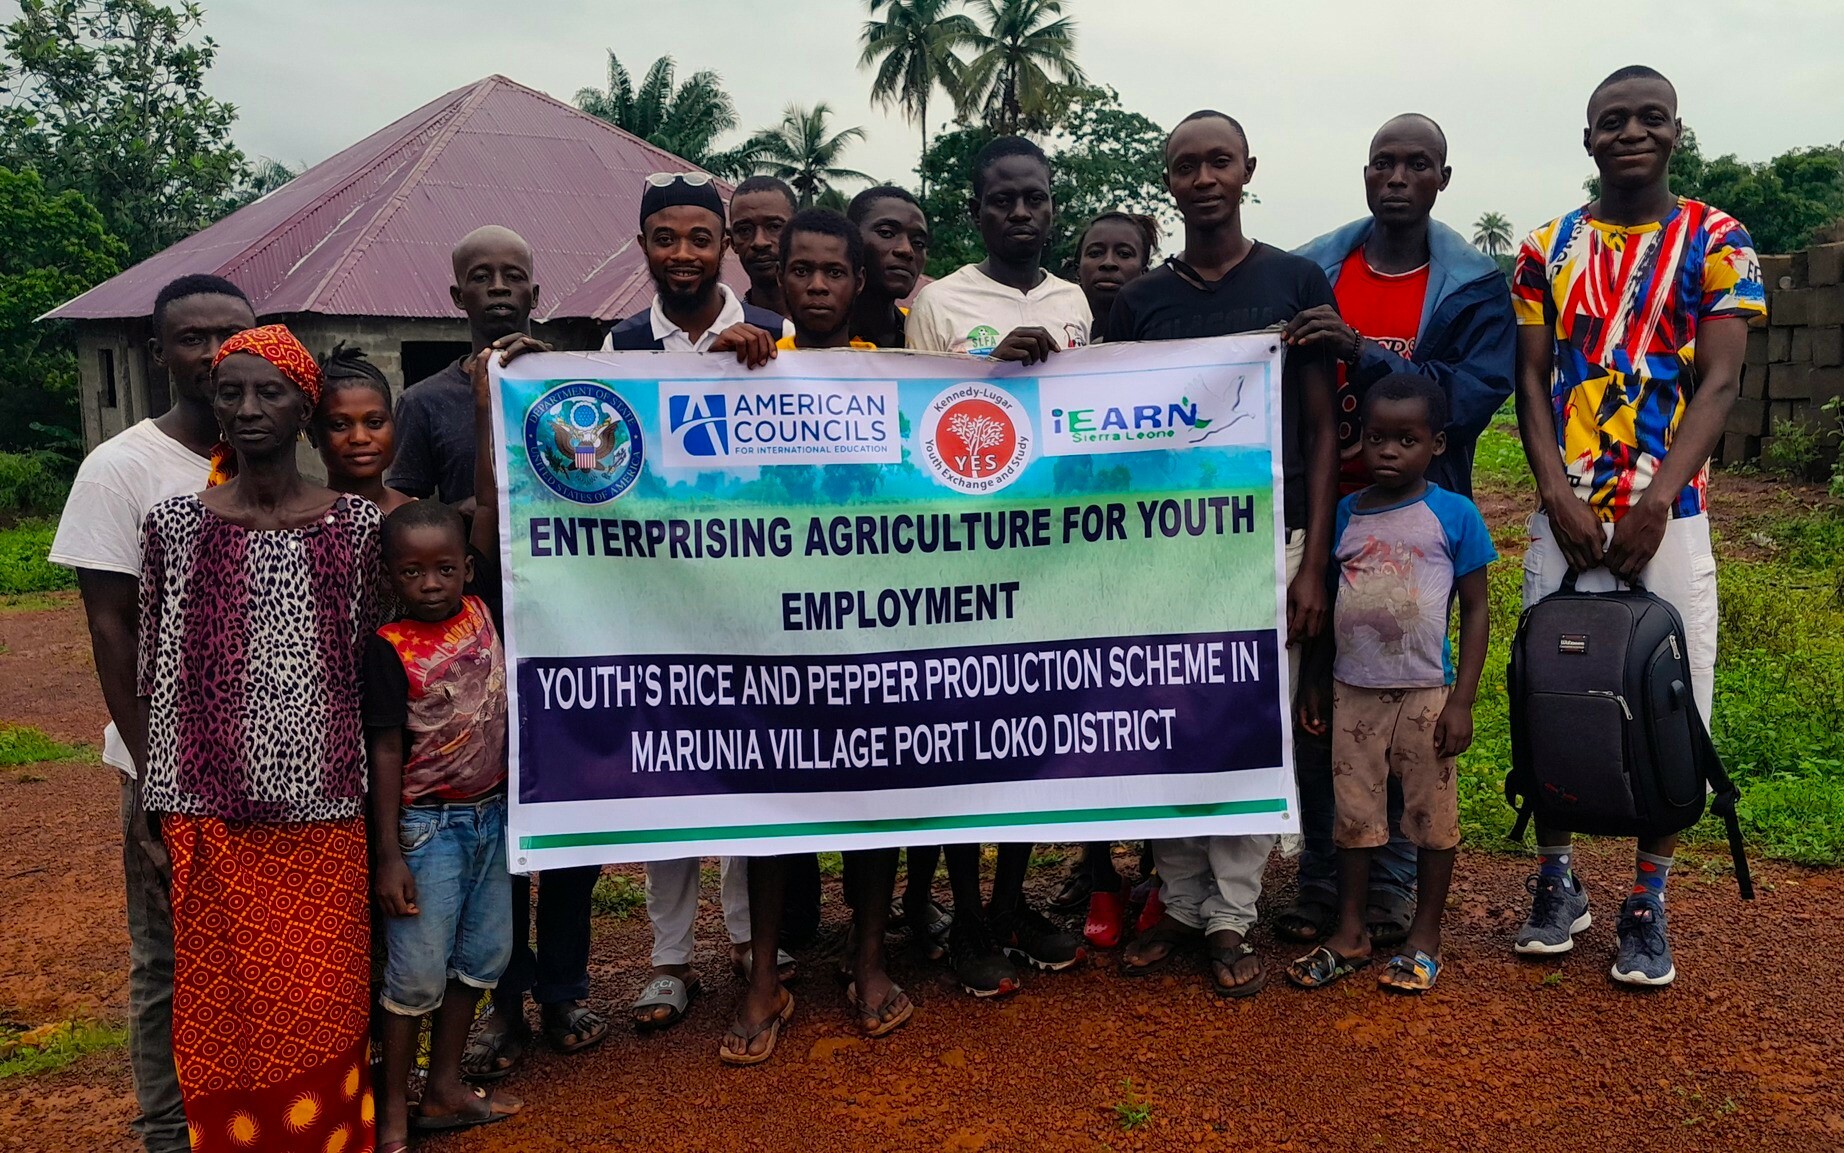 A Group Photo Of Some Of The Participants And Their Children After The Agripreneurship Conference They Are Holding A Poster